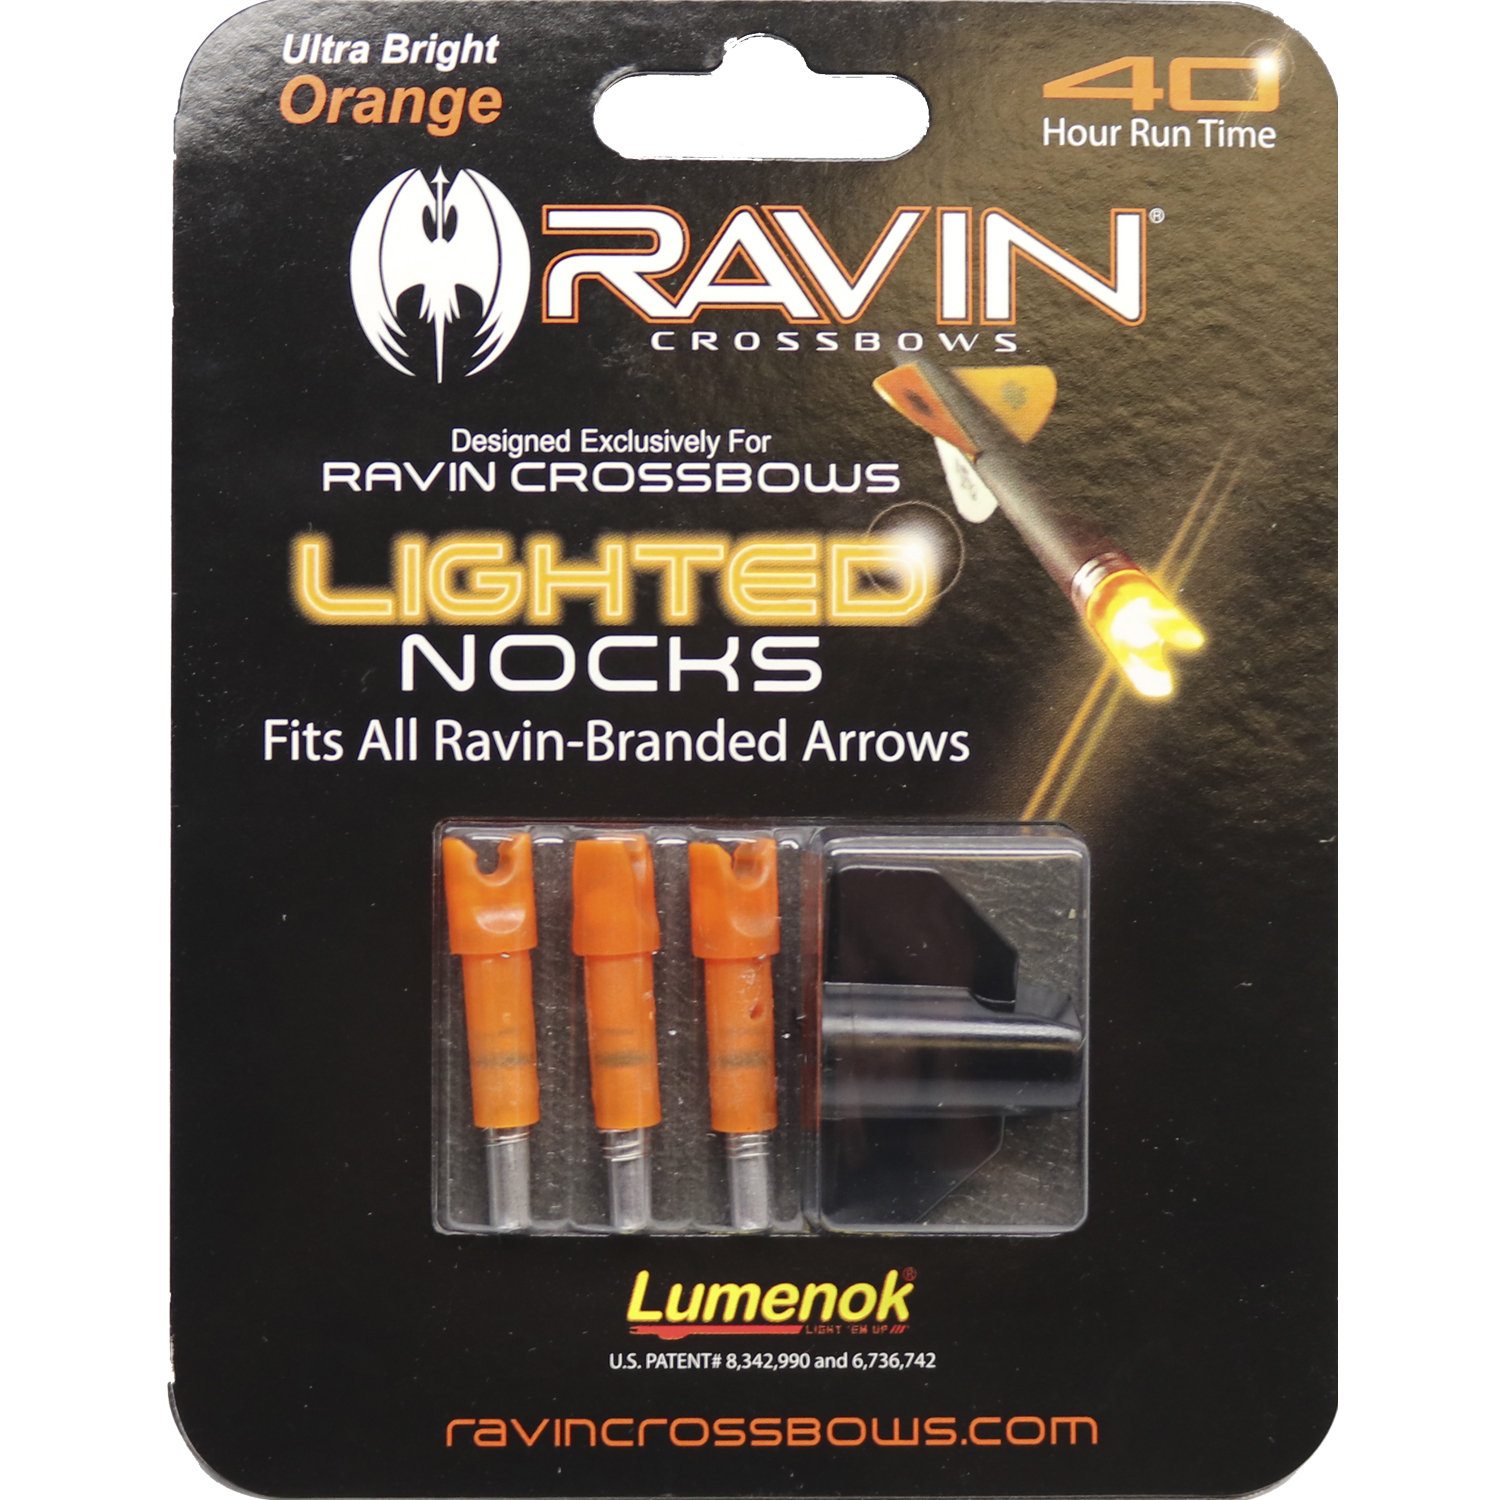 3 PACK ULTRA BRIGHT ORANGE 40 HOUR RUN TIME Details about   RAVIN CROSSBOW LIGHTED NOCKS 